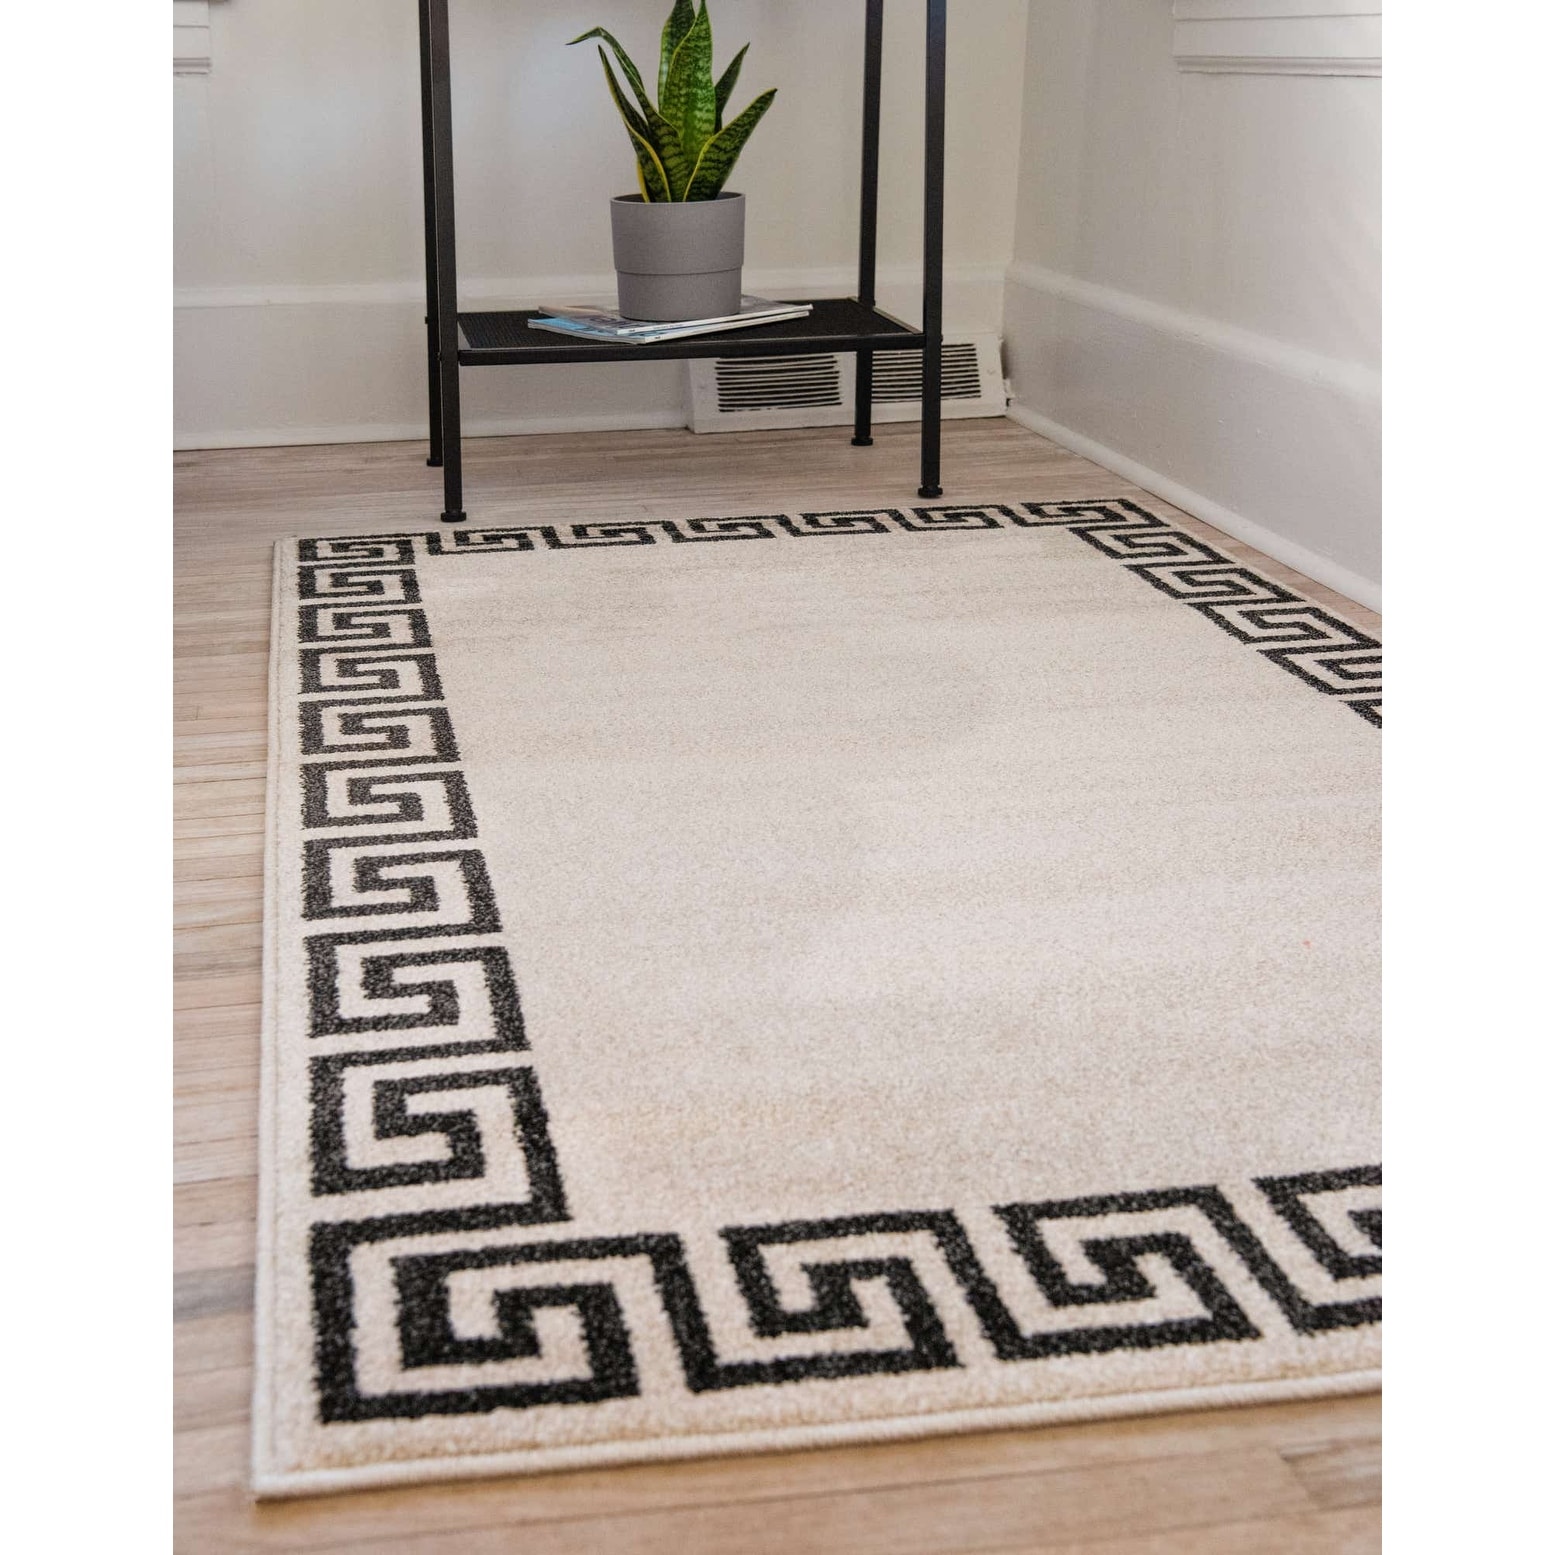 Unique Loom Athens Collection Geometric Casual Modern Border Charcoal Area Rug 3137310 2 x 3 